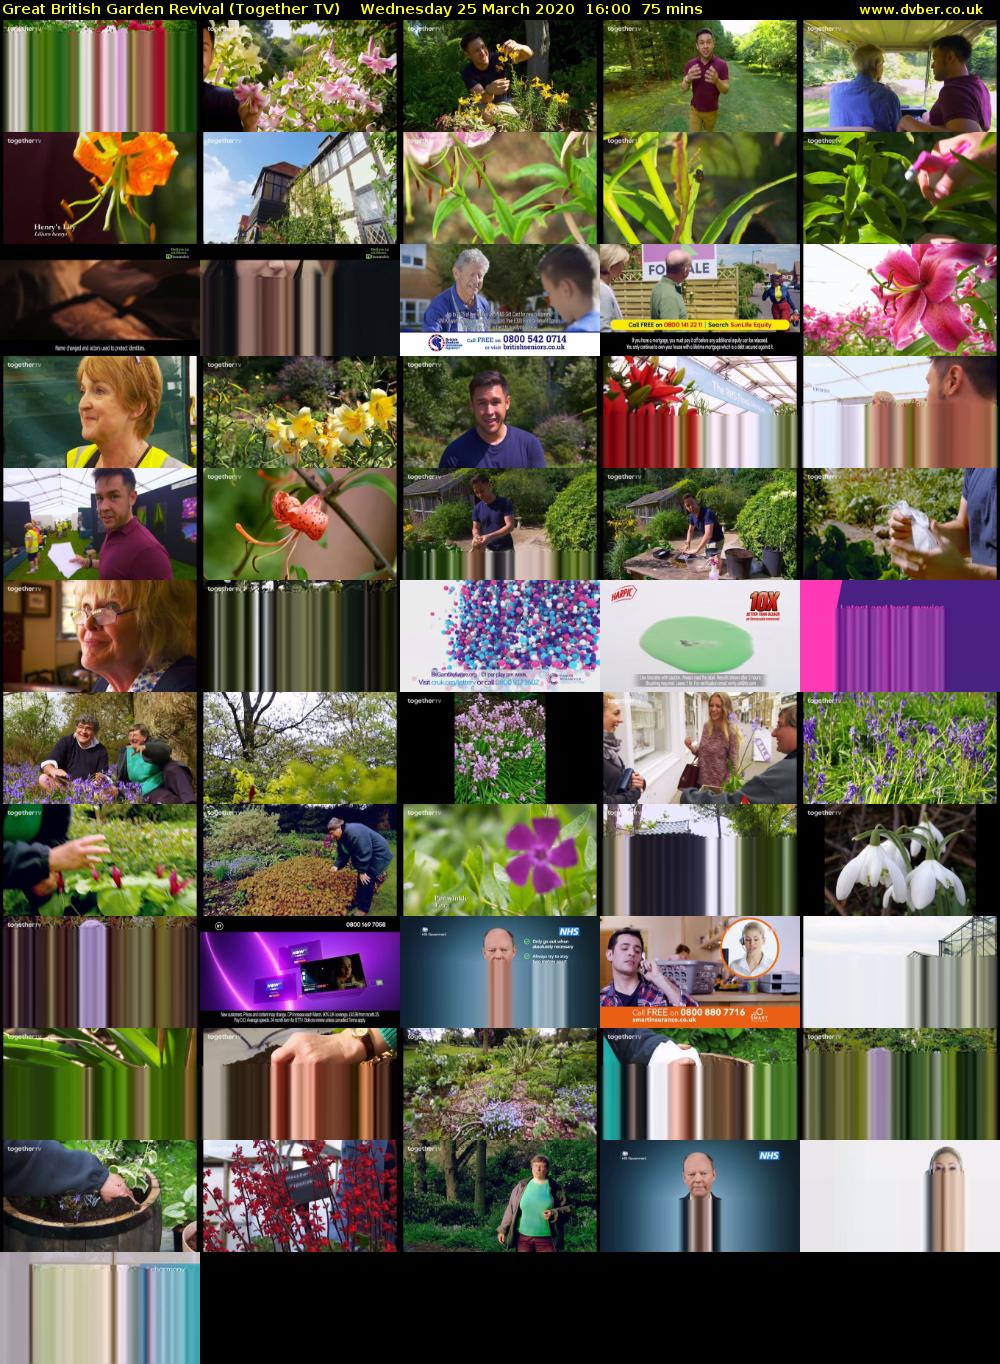 Great British Garden Revival (Together TV) Wednesday 25 March 2020 16:00 - 17:15